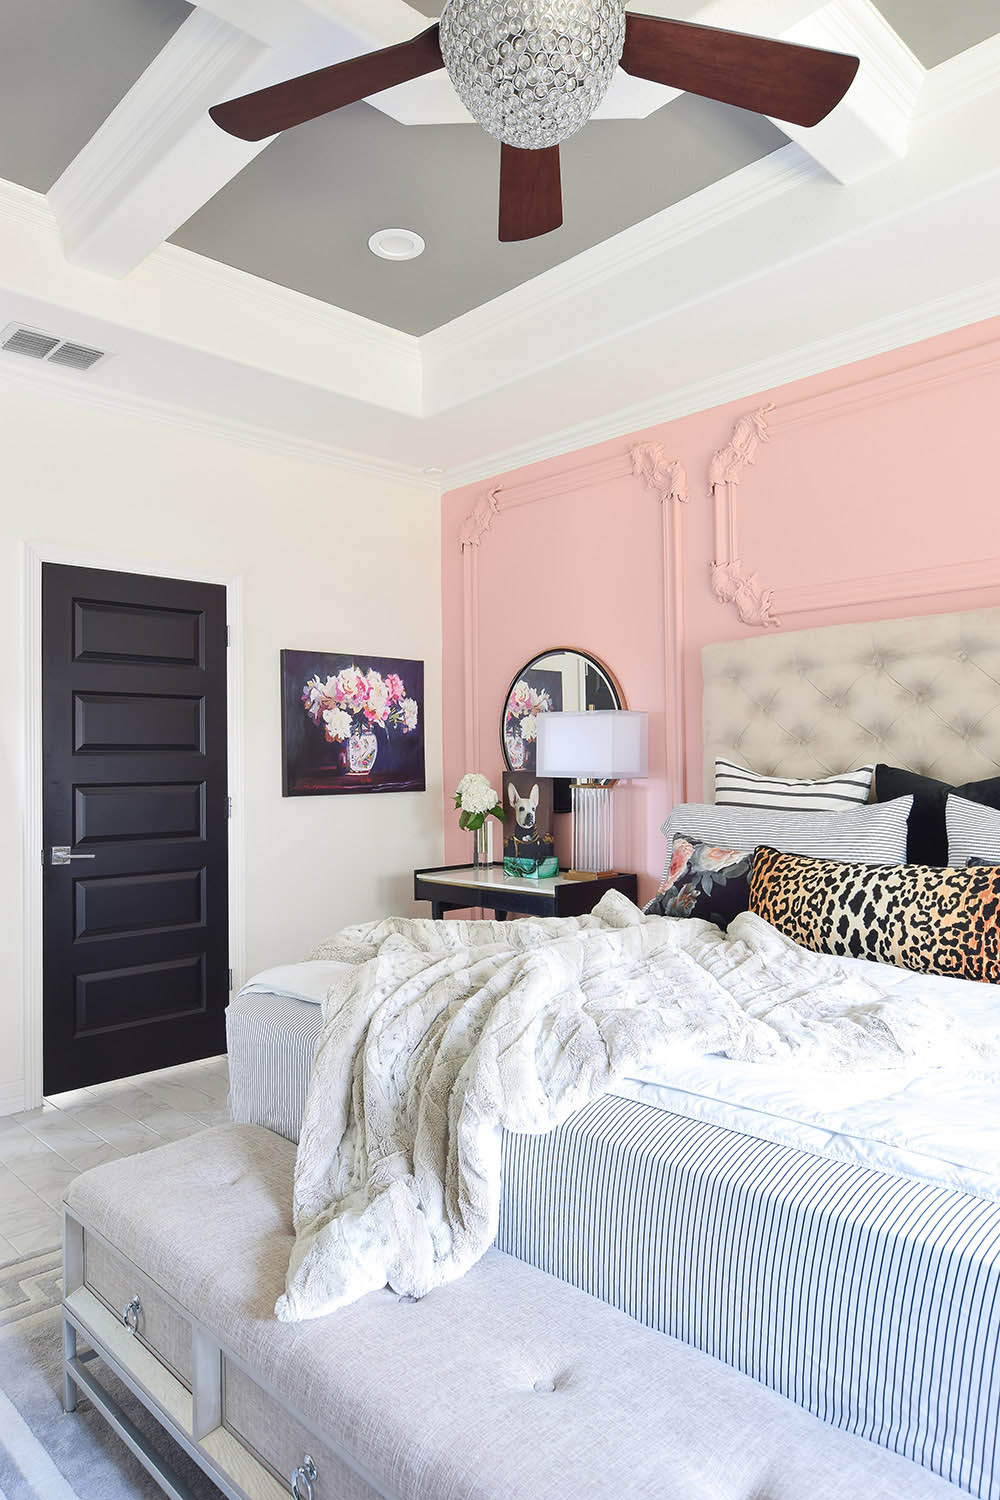 Accent Wall Paint as Decor in a Master Bedroom